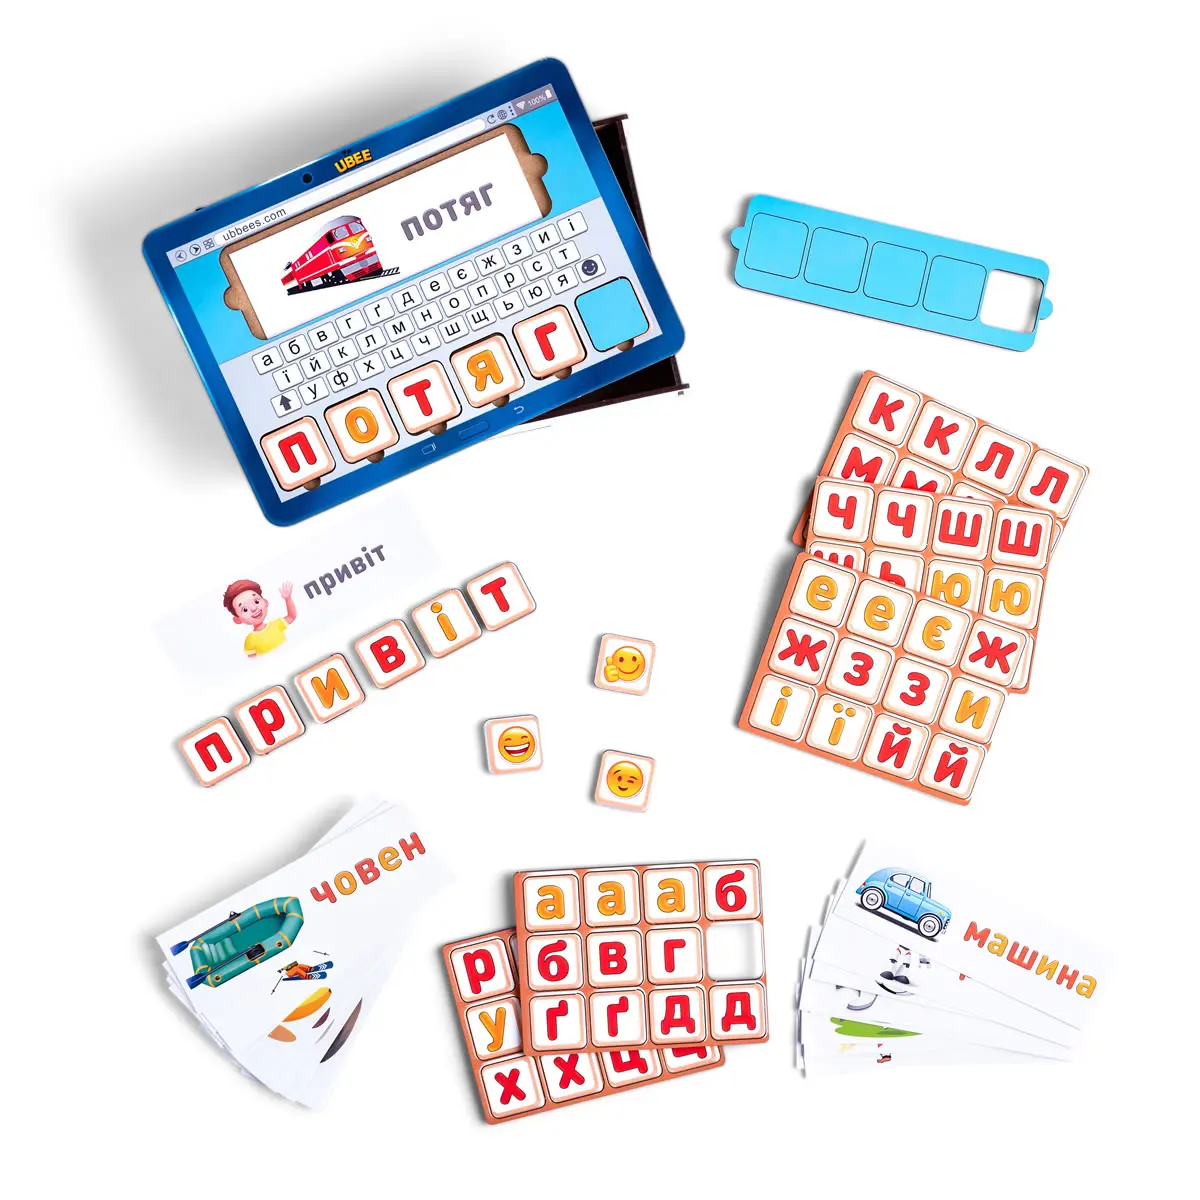 Board for boys "Assemble words using pictures" ukrainian language